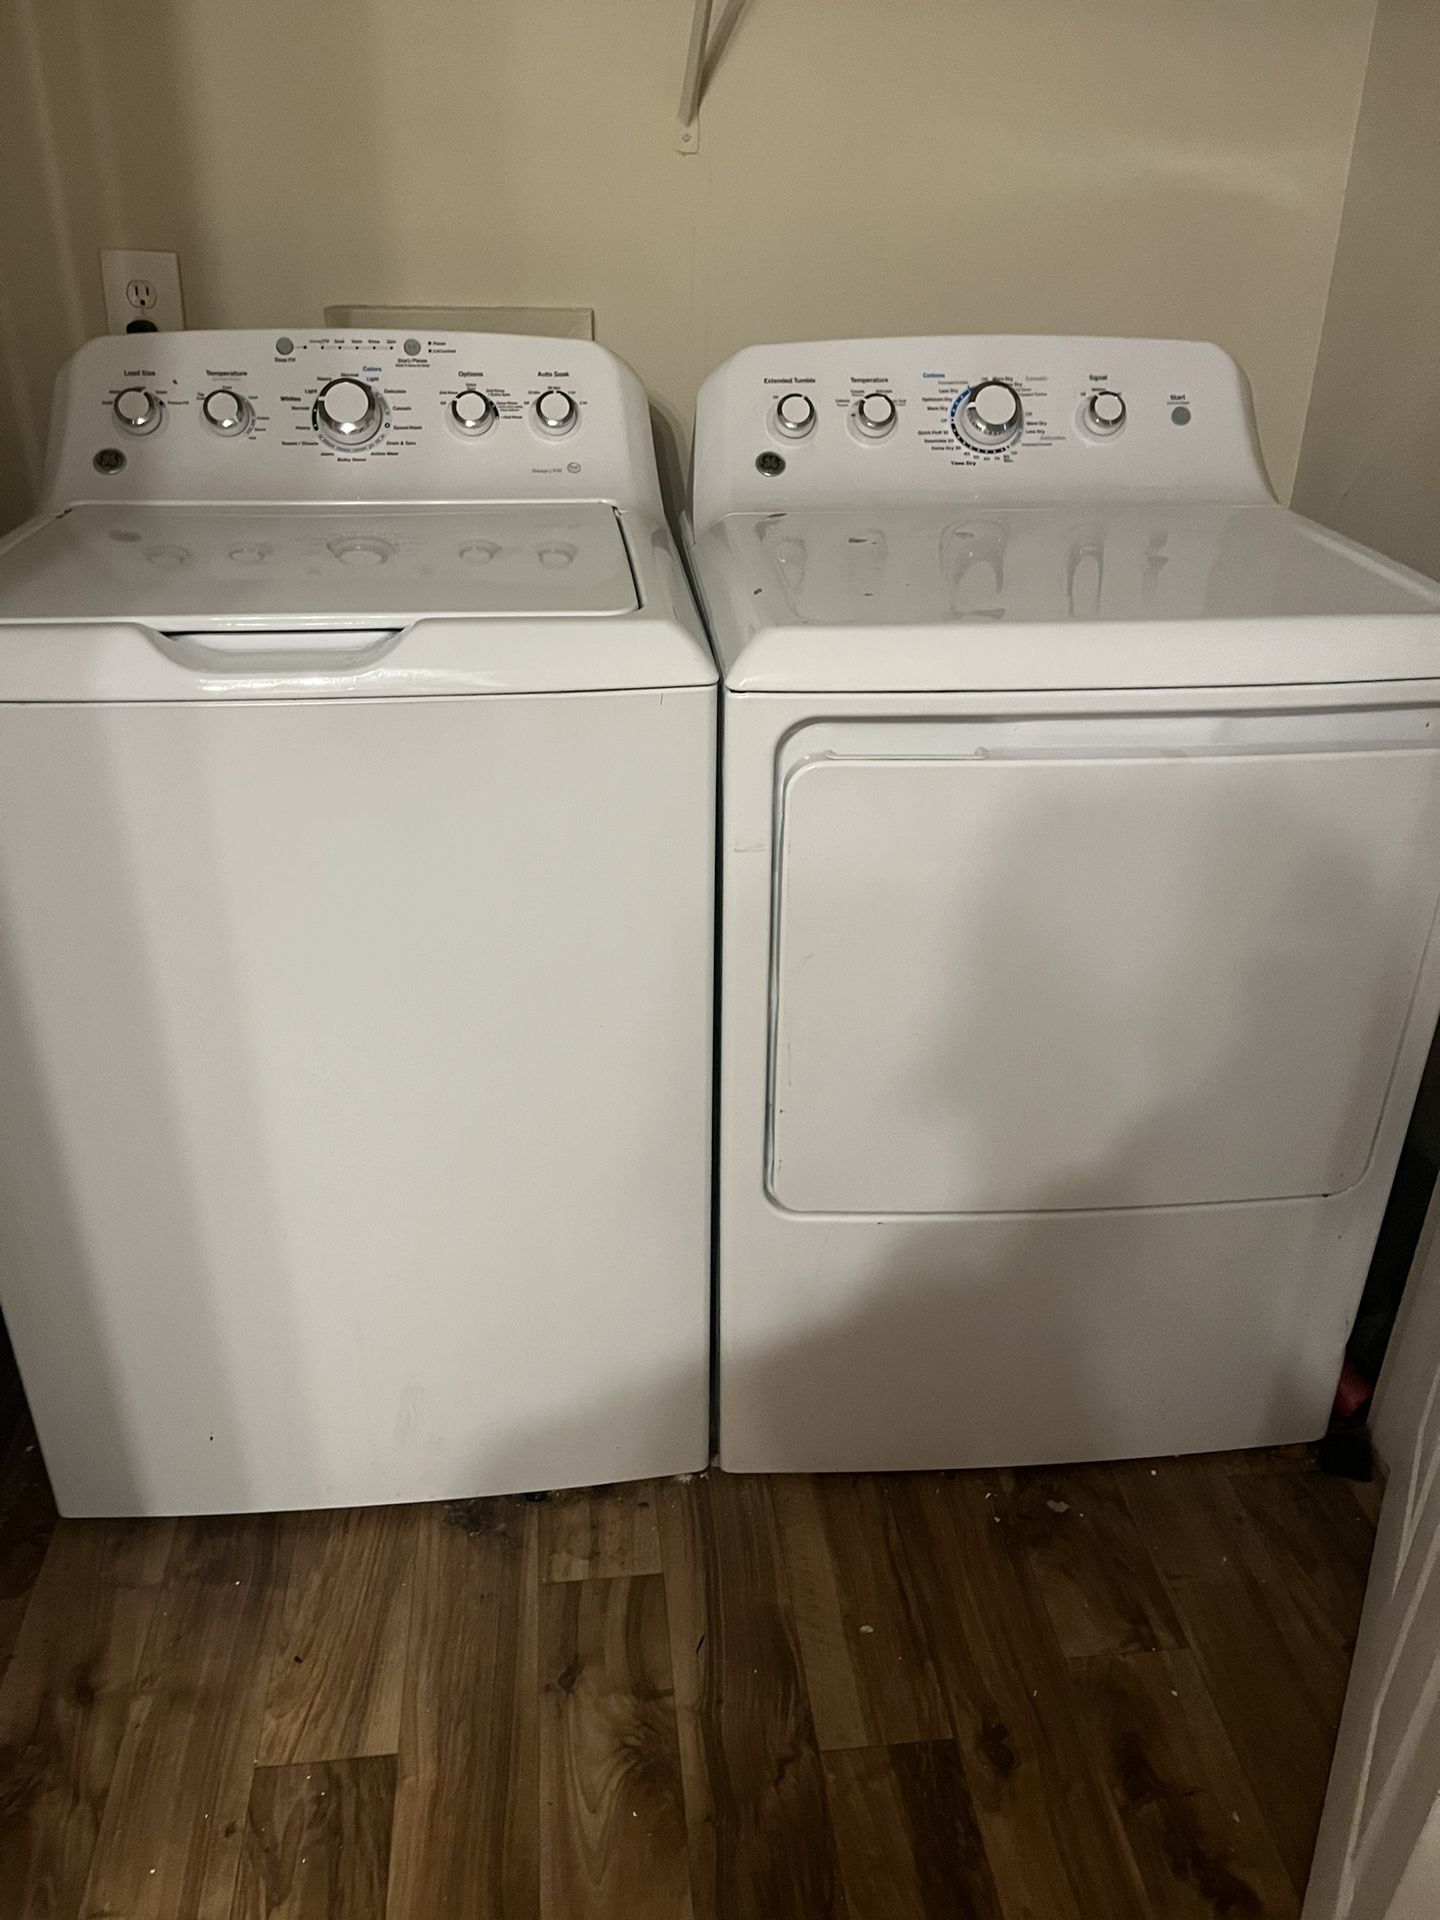 GE Washer And Dryer 